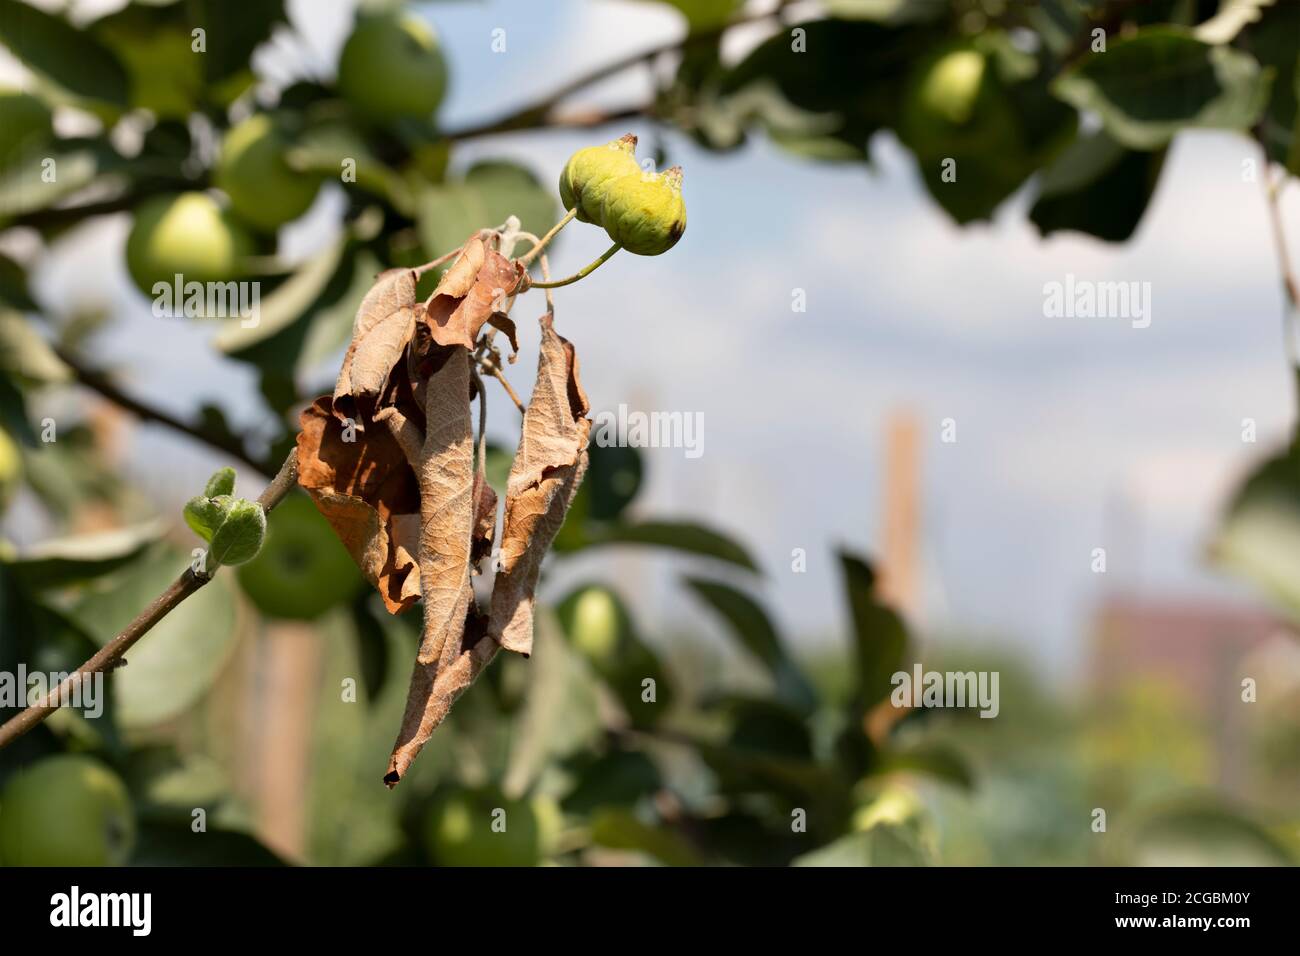 Erwinia amylovora bacteria atacks fruit trees leaves and causes disease, bacterial burn or fire blight of young shoots of apple tree. Stock Photo